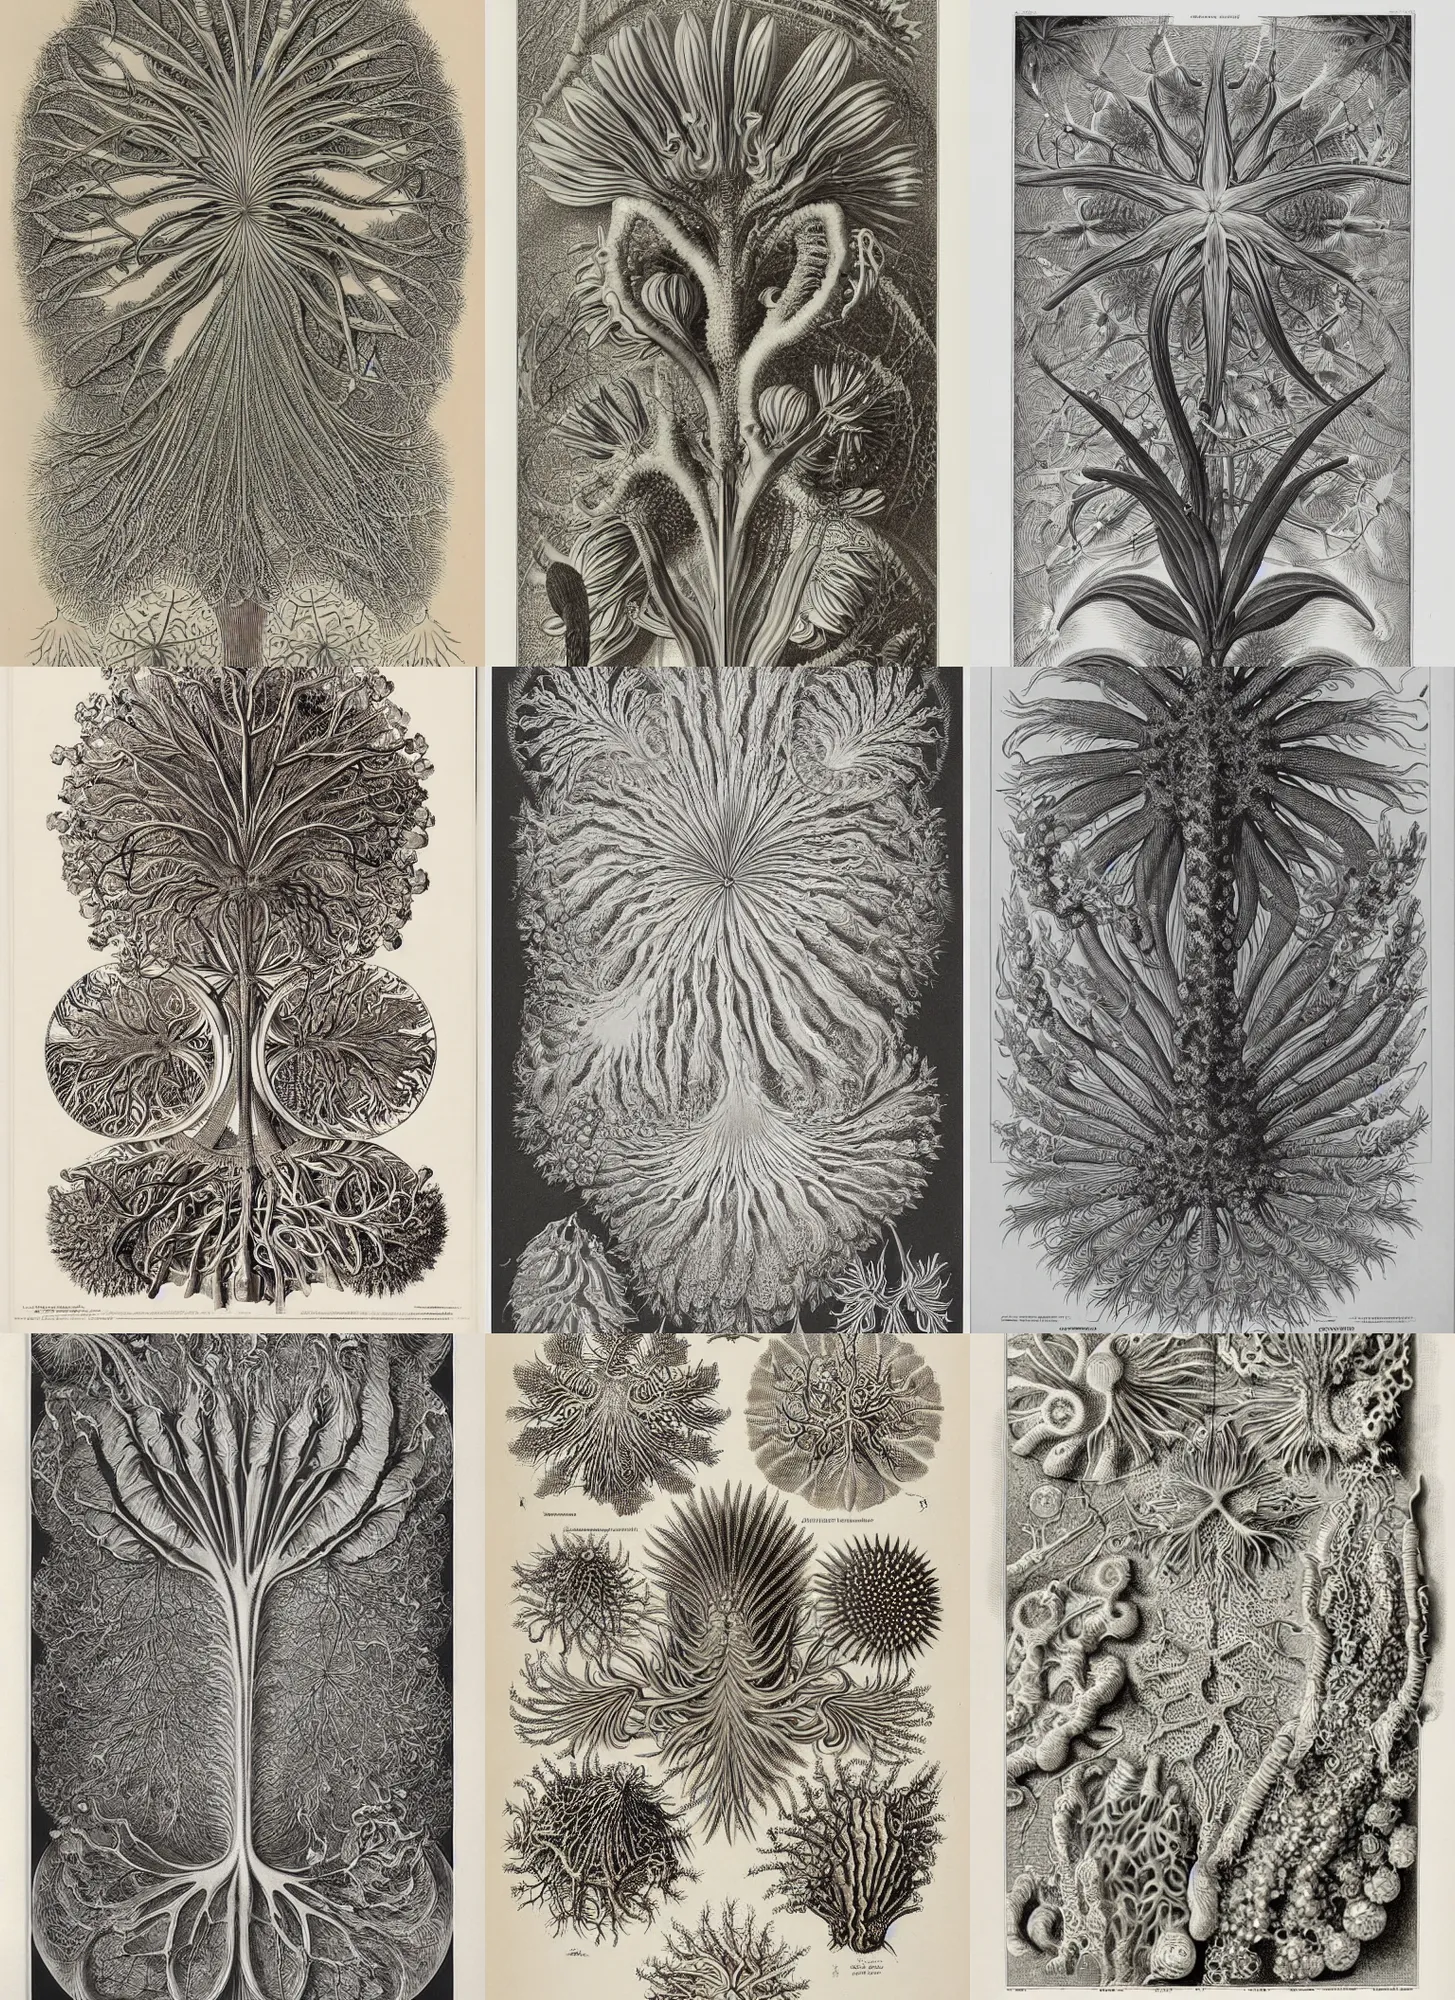 Prompt: A print by Ernst Haeckel